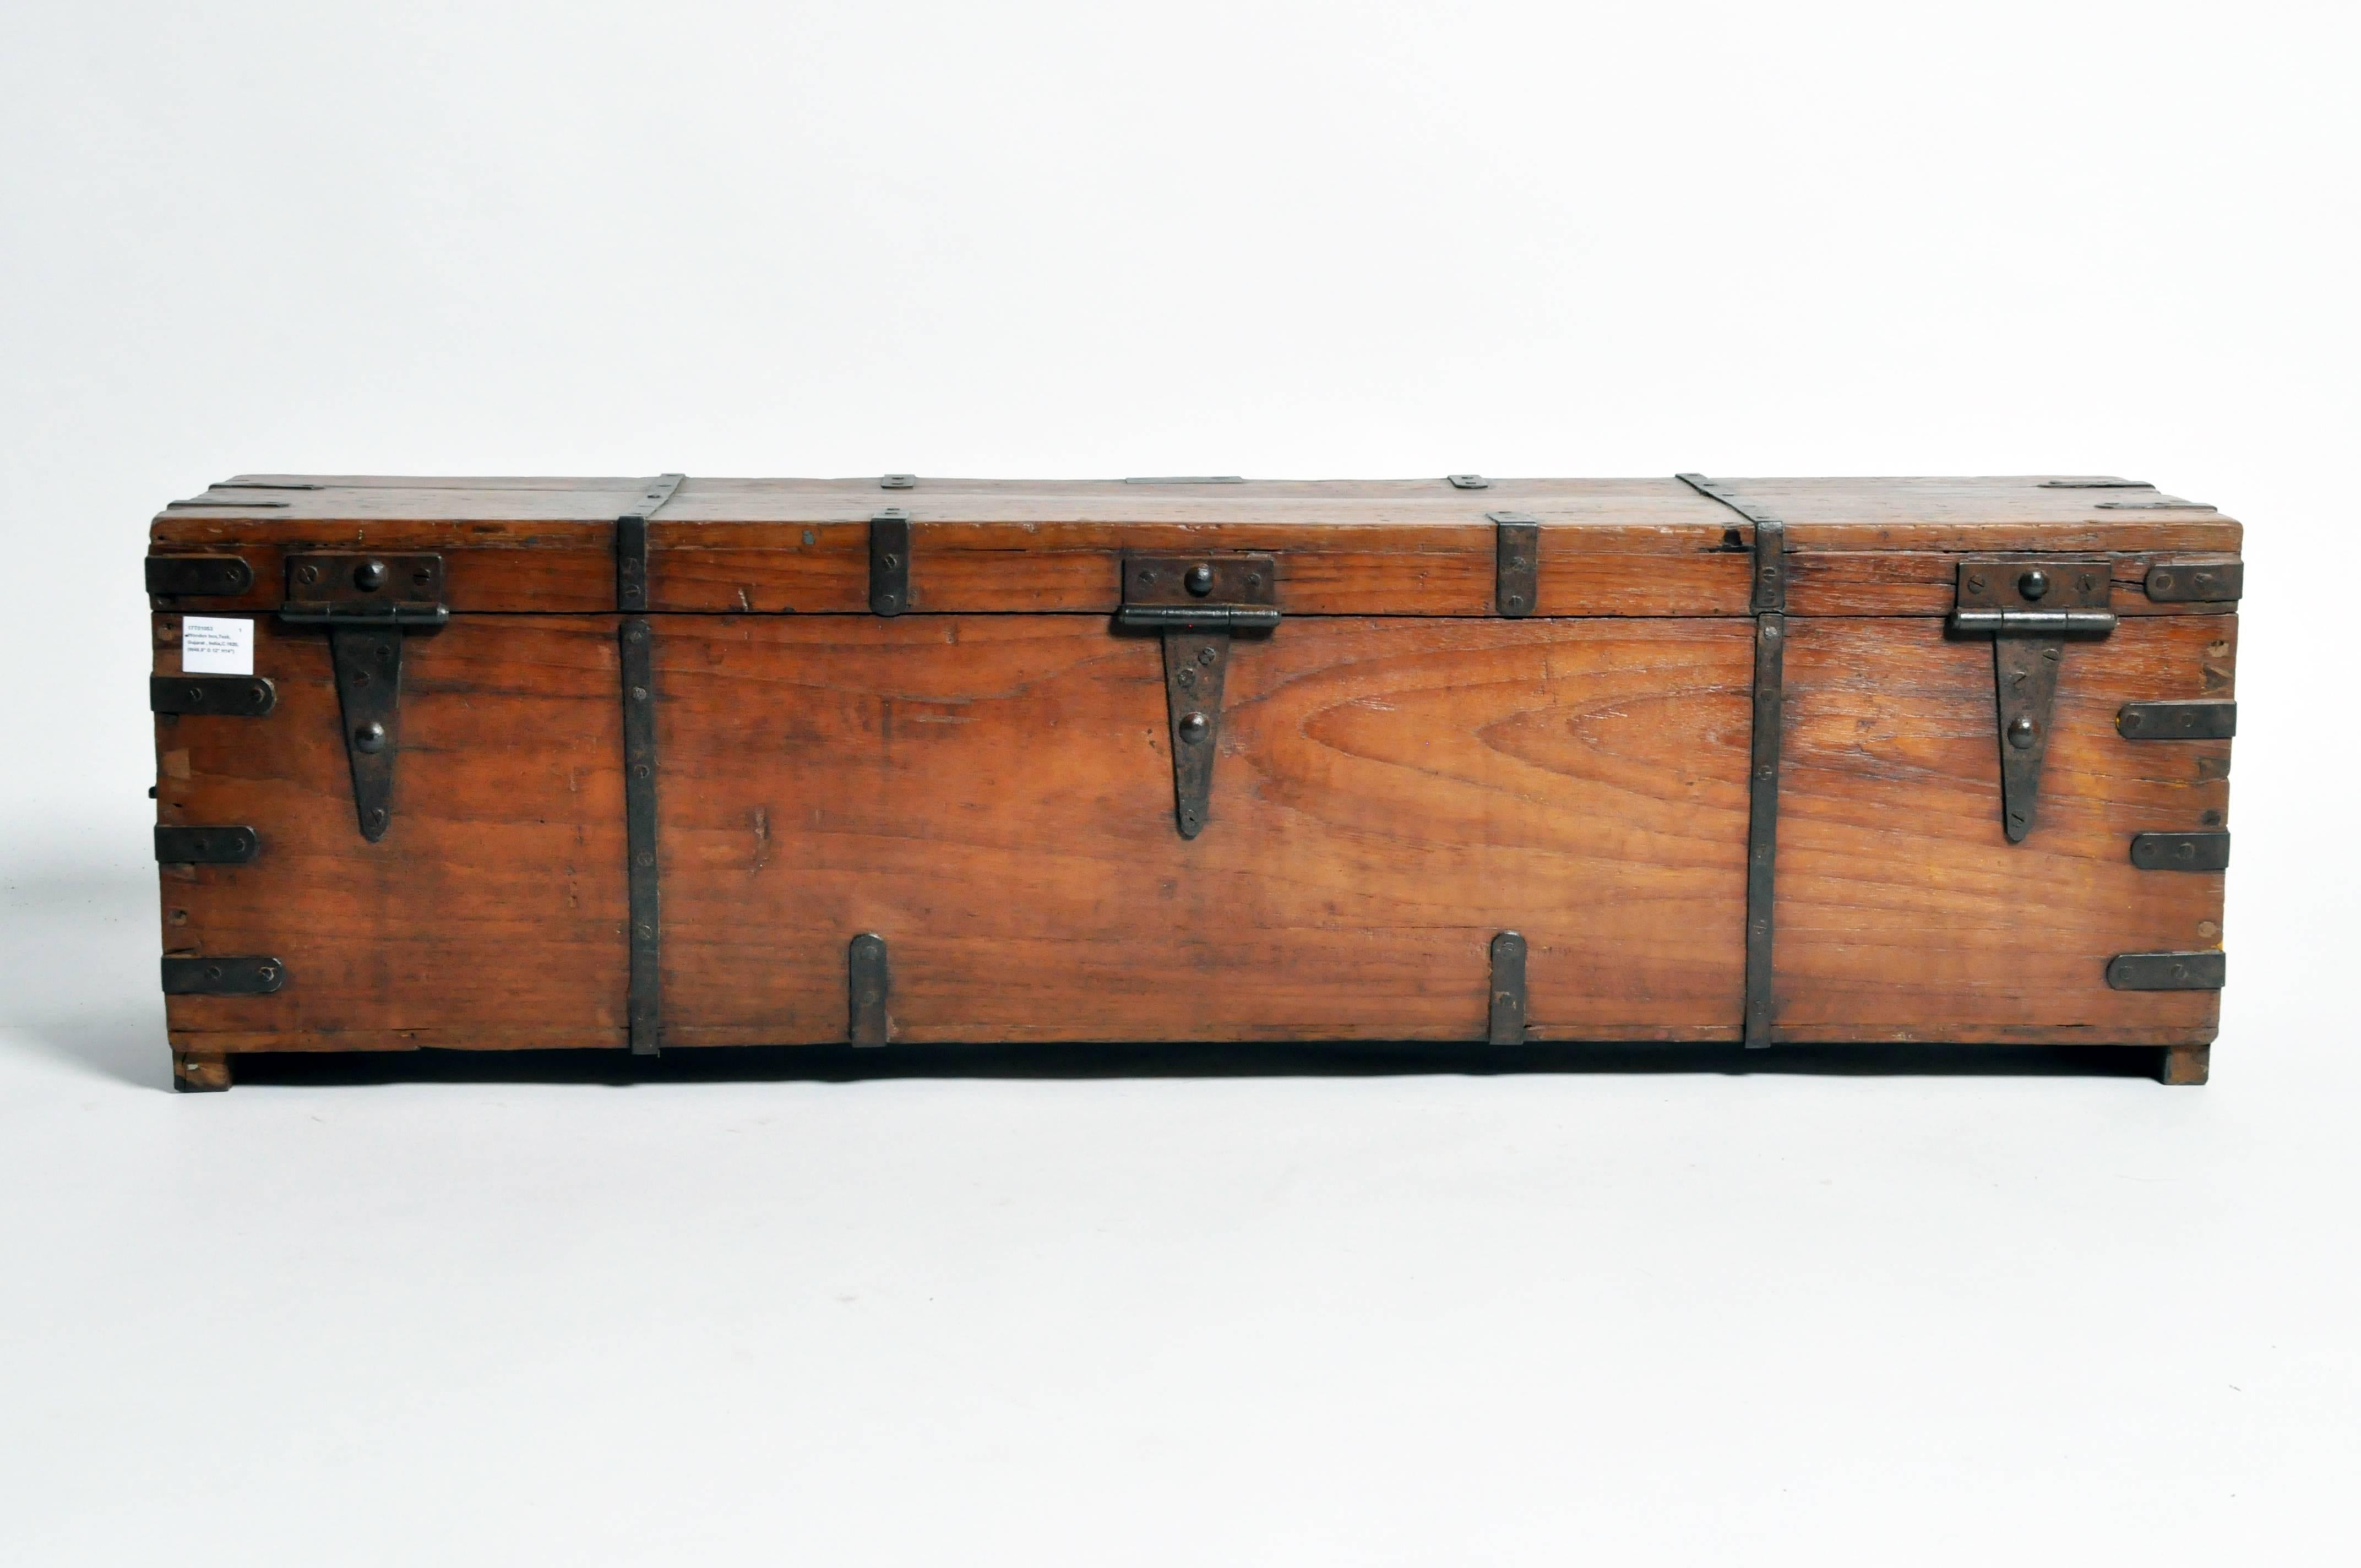 This vintage rifle box is from Gujarat, India and is a reinforced strongbox made from teak wood with hand-forged iron banding, circa 1920.